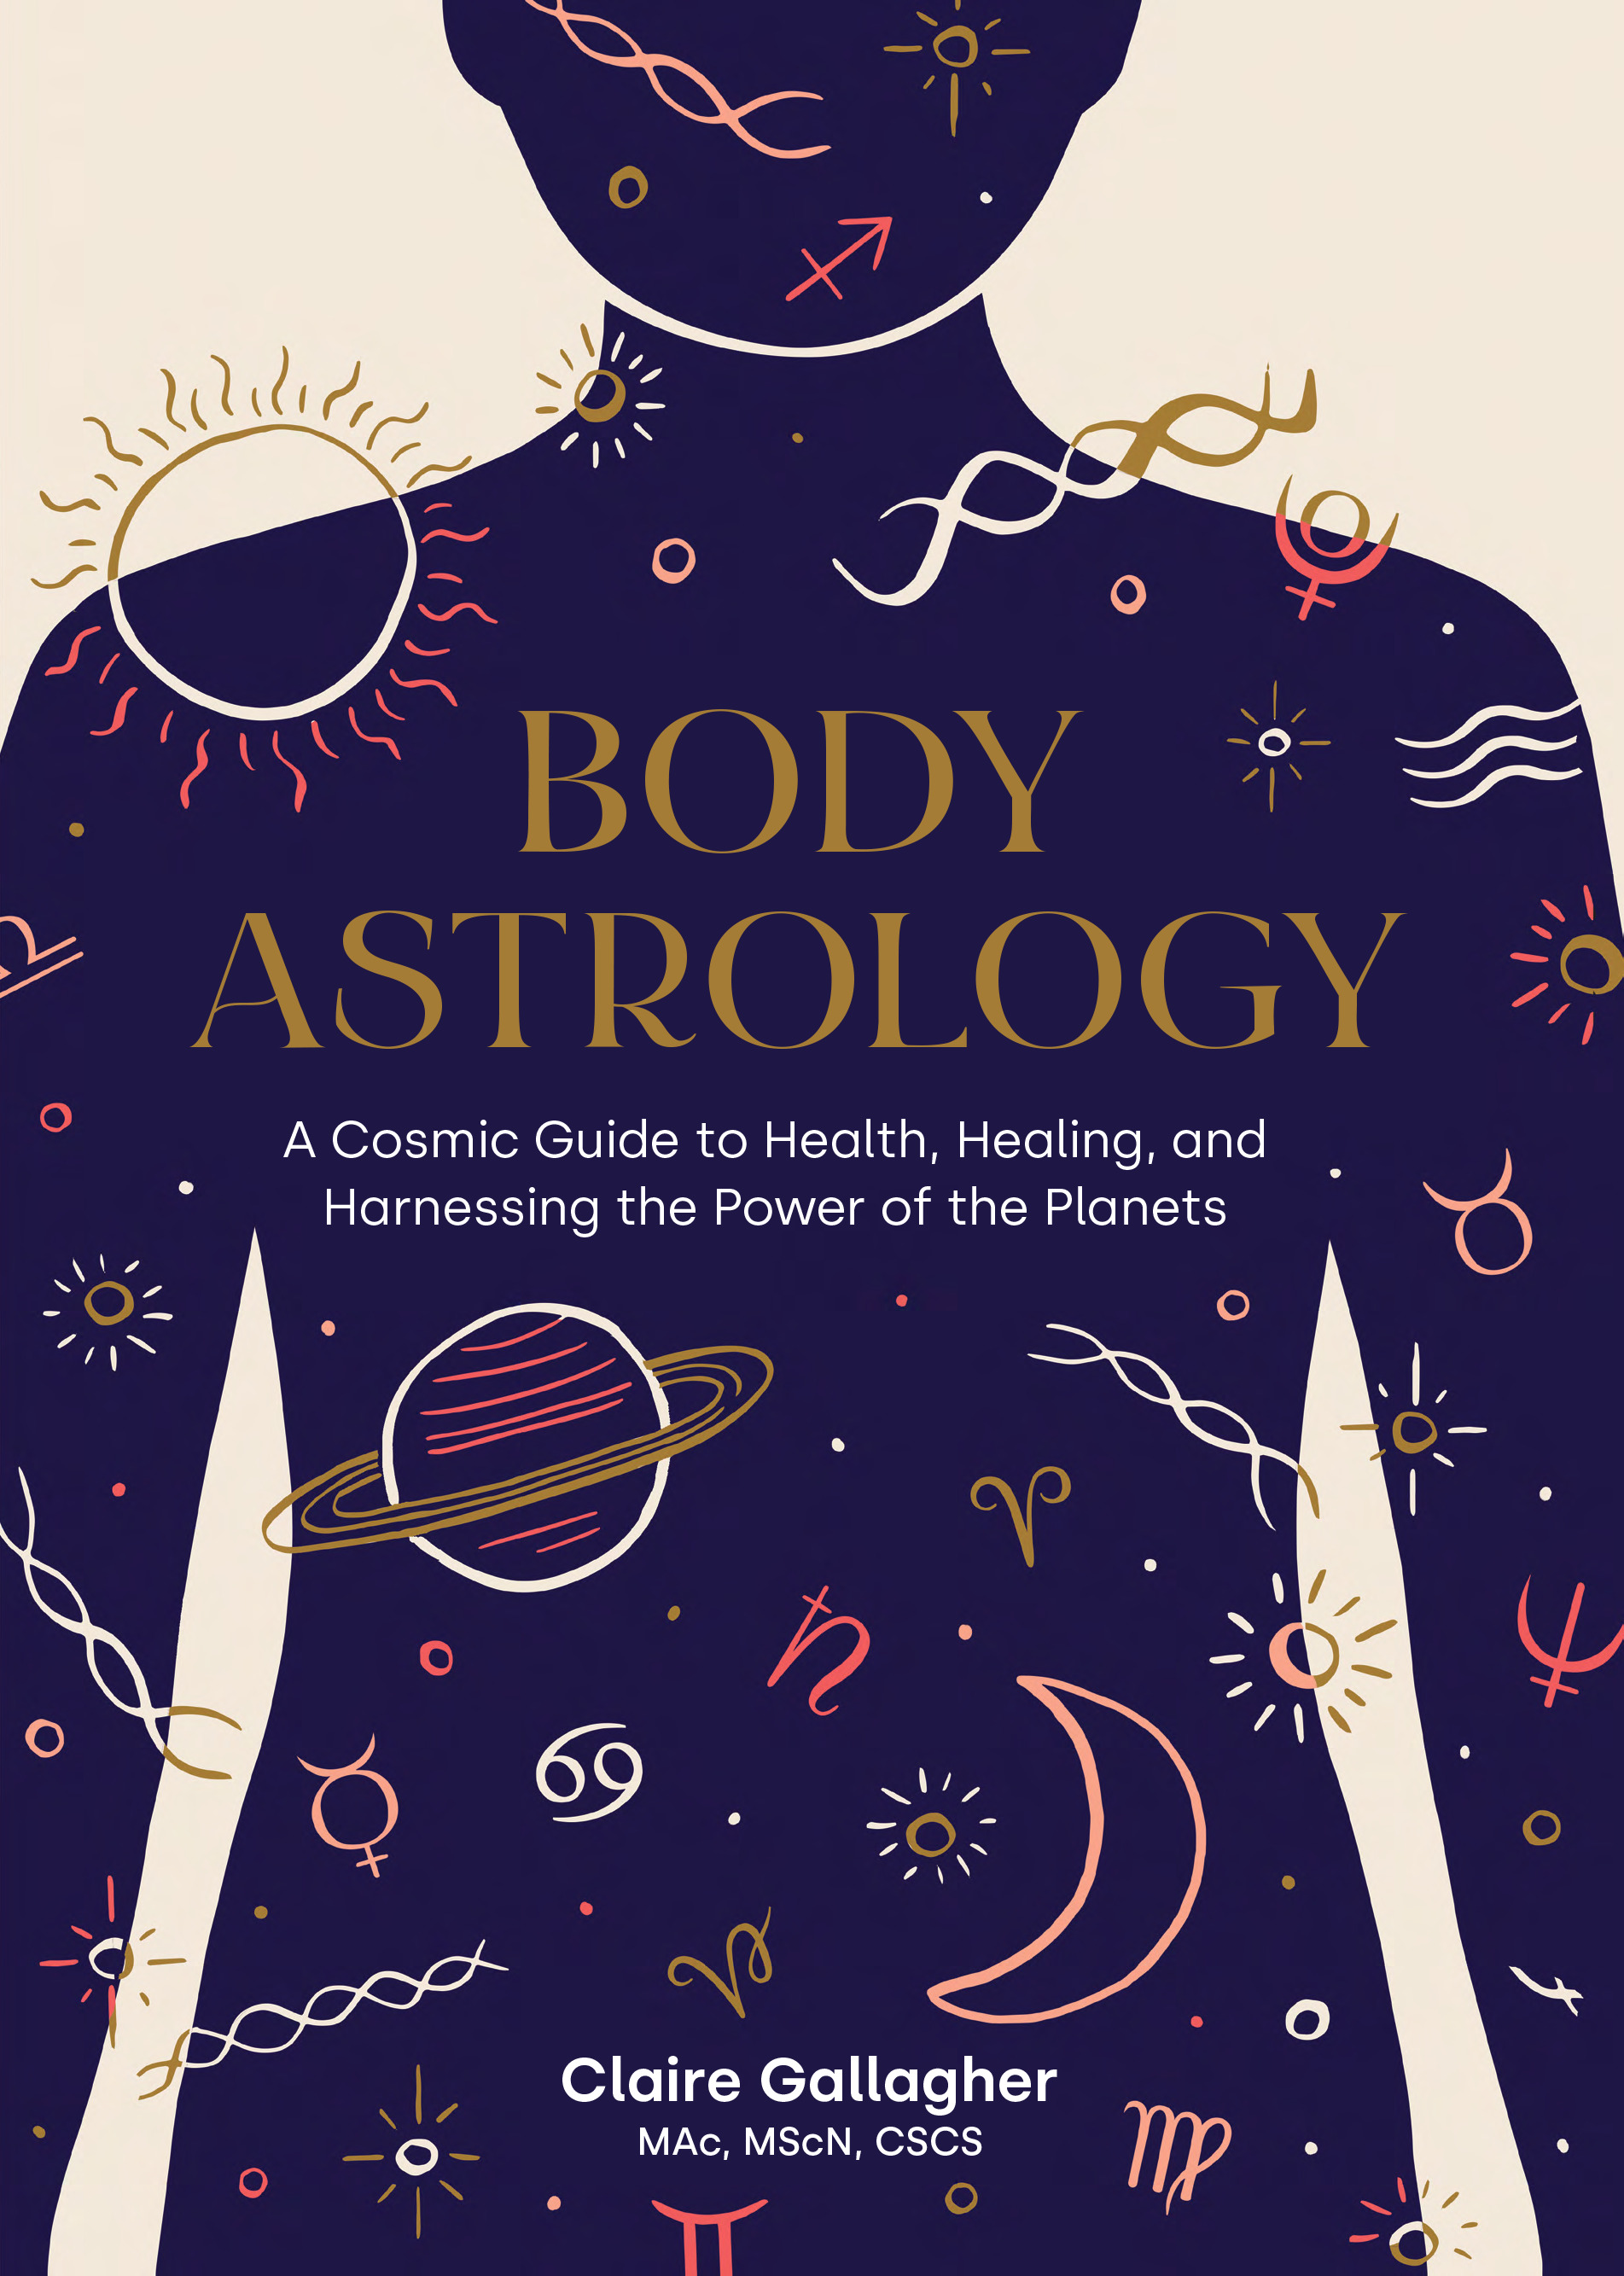 Body Astrology : A Cosmic Guide to Health, Healing, and Harnessing the Power of the Planets | Gallagher, Claire